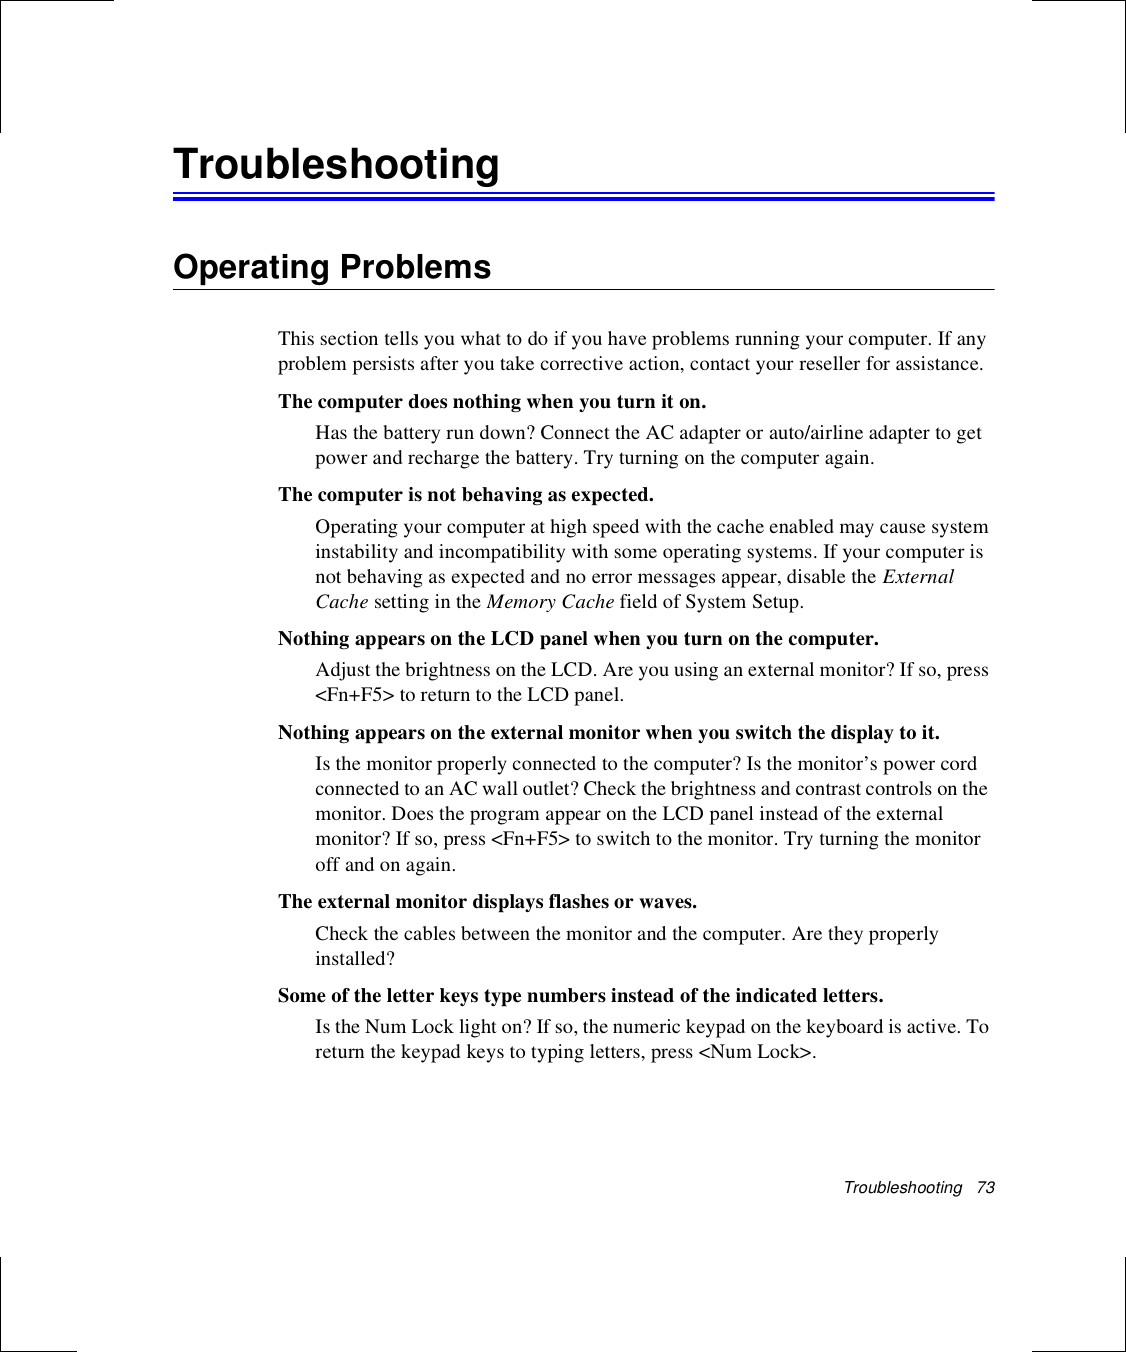 Troubleshooting   73TroubleshootingOperating ProblemsThis section tells you what to do if you have problems running your computer. If any problem persists after you take corrective action, contact your reseller for assistance.The computer does nothing when you turn it on.Has the battery run down? Connect the AC adapter or auto/airline adapter to get power and recharge the battery. Try turning on the computer again.The computer is not behaving as expected.Operating your computer at high speed with the cache enabled may cause system instability and incompatibility with some operating systems. If your computer is not behaving as expected and no error messages appear, disable the External Cache setting in the Memory Cache field of System Setup. Nothing appears on the LCD panel when you turn on the computer.Adjust the brightness on the LCD. Are you using an external monitor? If so, press &lt;Fn+F5&gt; to return to the LCD panel.Nothing appears on the external monitor when you switch the display to it.Is the monitor properly connected to the computer? Is the monitor’s power cord connected to an AC wall outlet? Check the brightness and contrast controls on the monitor. Does the program appear on the LCD panel instead of the external monitor? If so, press &lt;Fn+F5&gt; to switch to the monitor. Try turning the monitor off and on again.The external monitor displays flashes or waves.Check the cables between the monitor and the computer. Are they properly installed?Some of the letter keys type numbers instead of the indicated letters.Is the Num Lock light on? If so, the numeric keypad on the keyboard is active. To return the keypad keys to typing letters, press &lt;Num Lock&gt;.